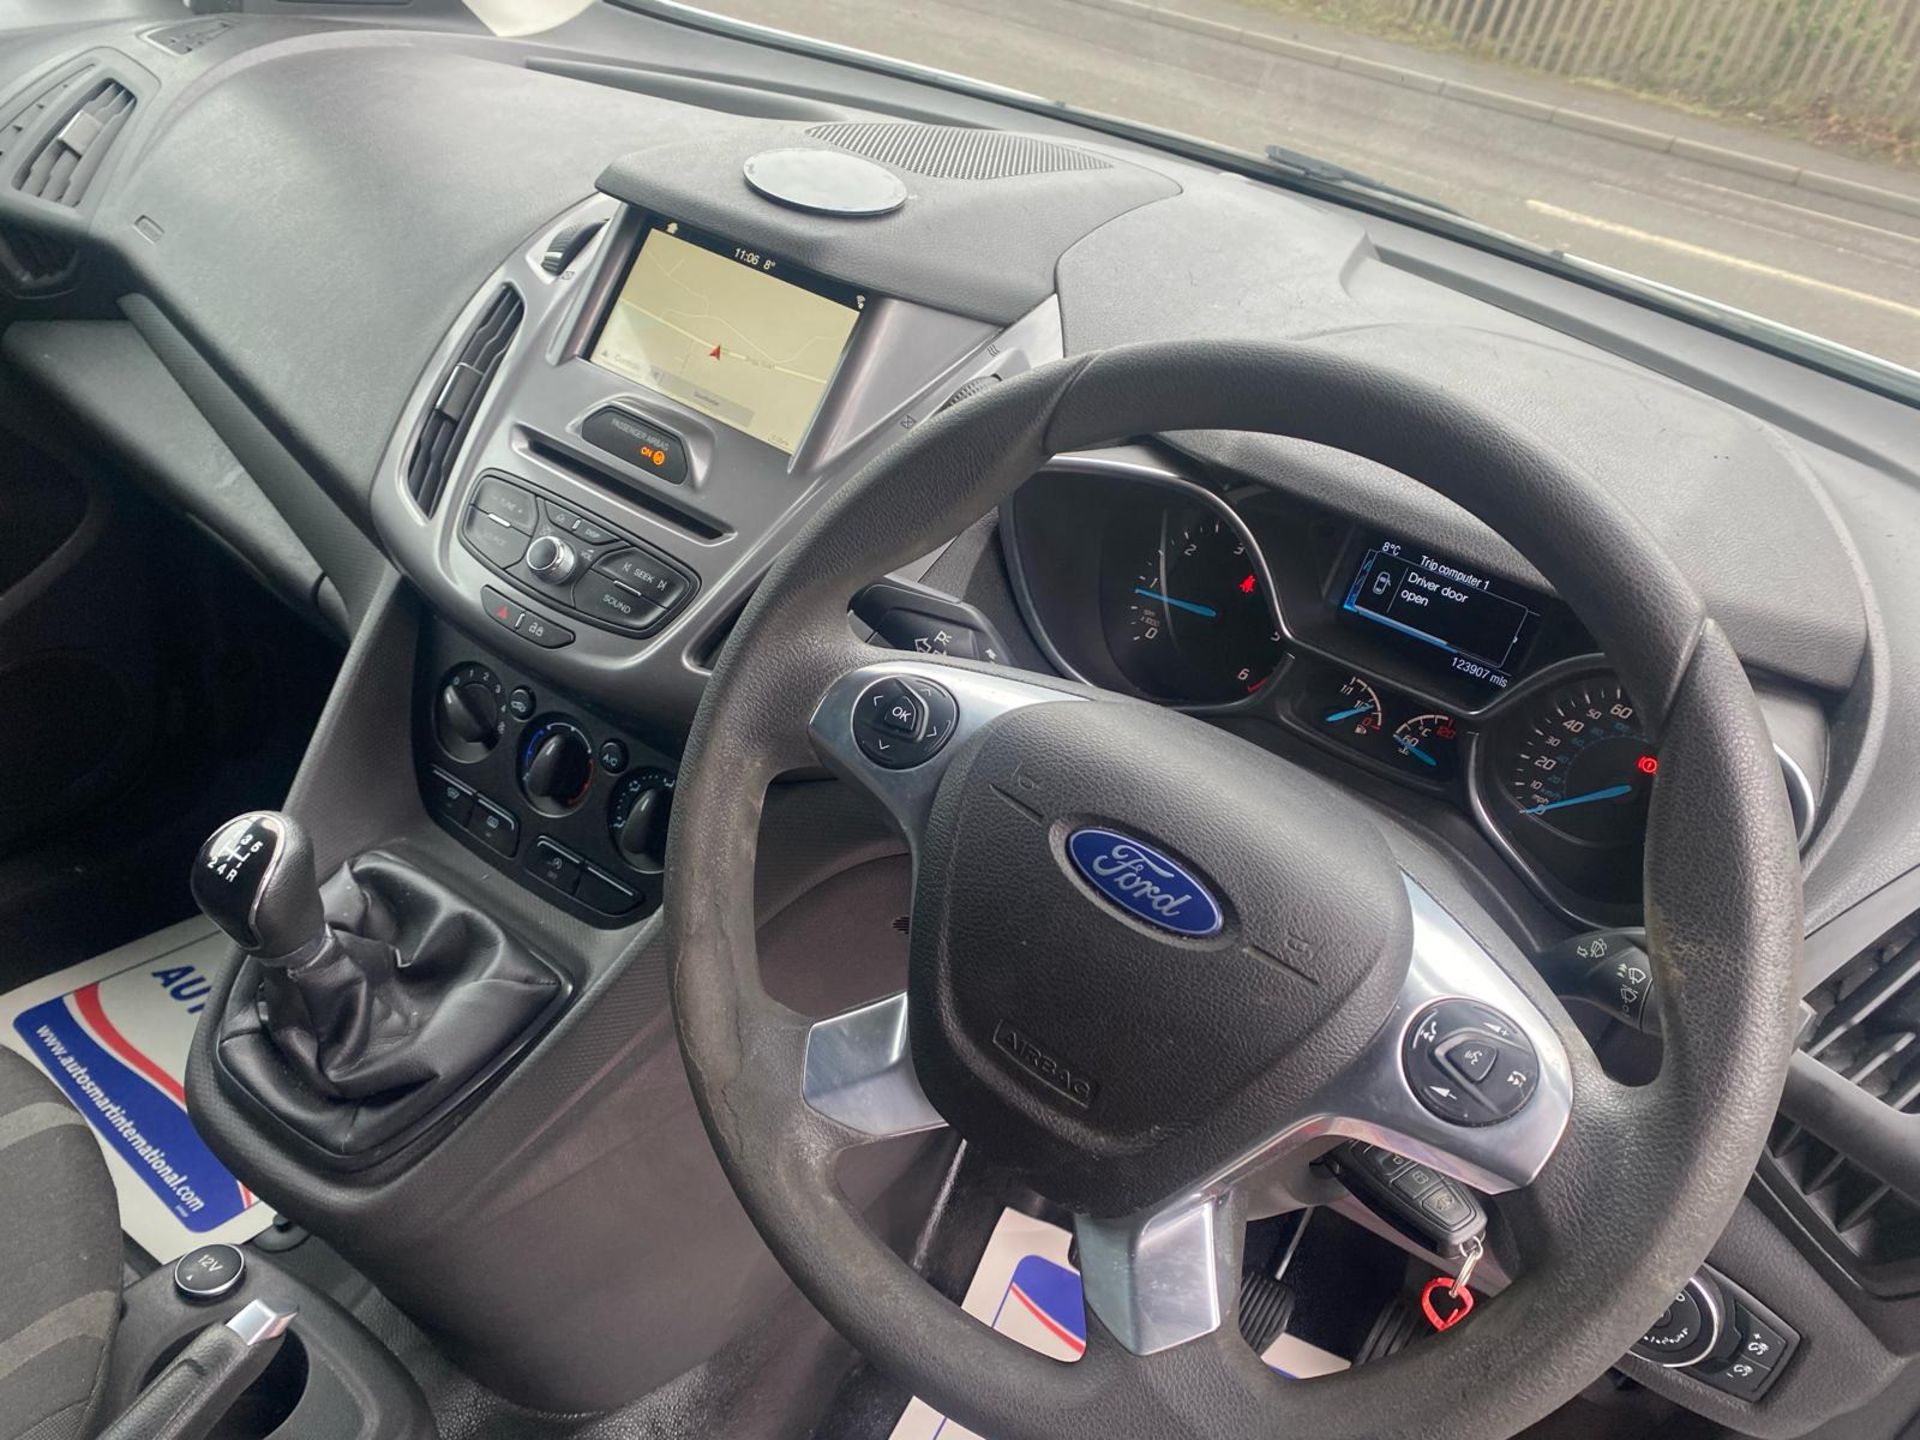 2017 17 FORD TRANSIT CONNECT TREND PANEL VAN - 3 SEATS - AIR CON - EURO 6 - REVERSE CAMERA - Image 10 of 13